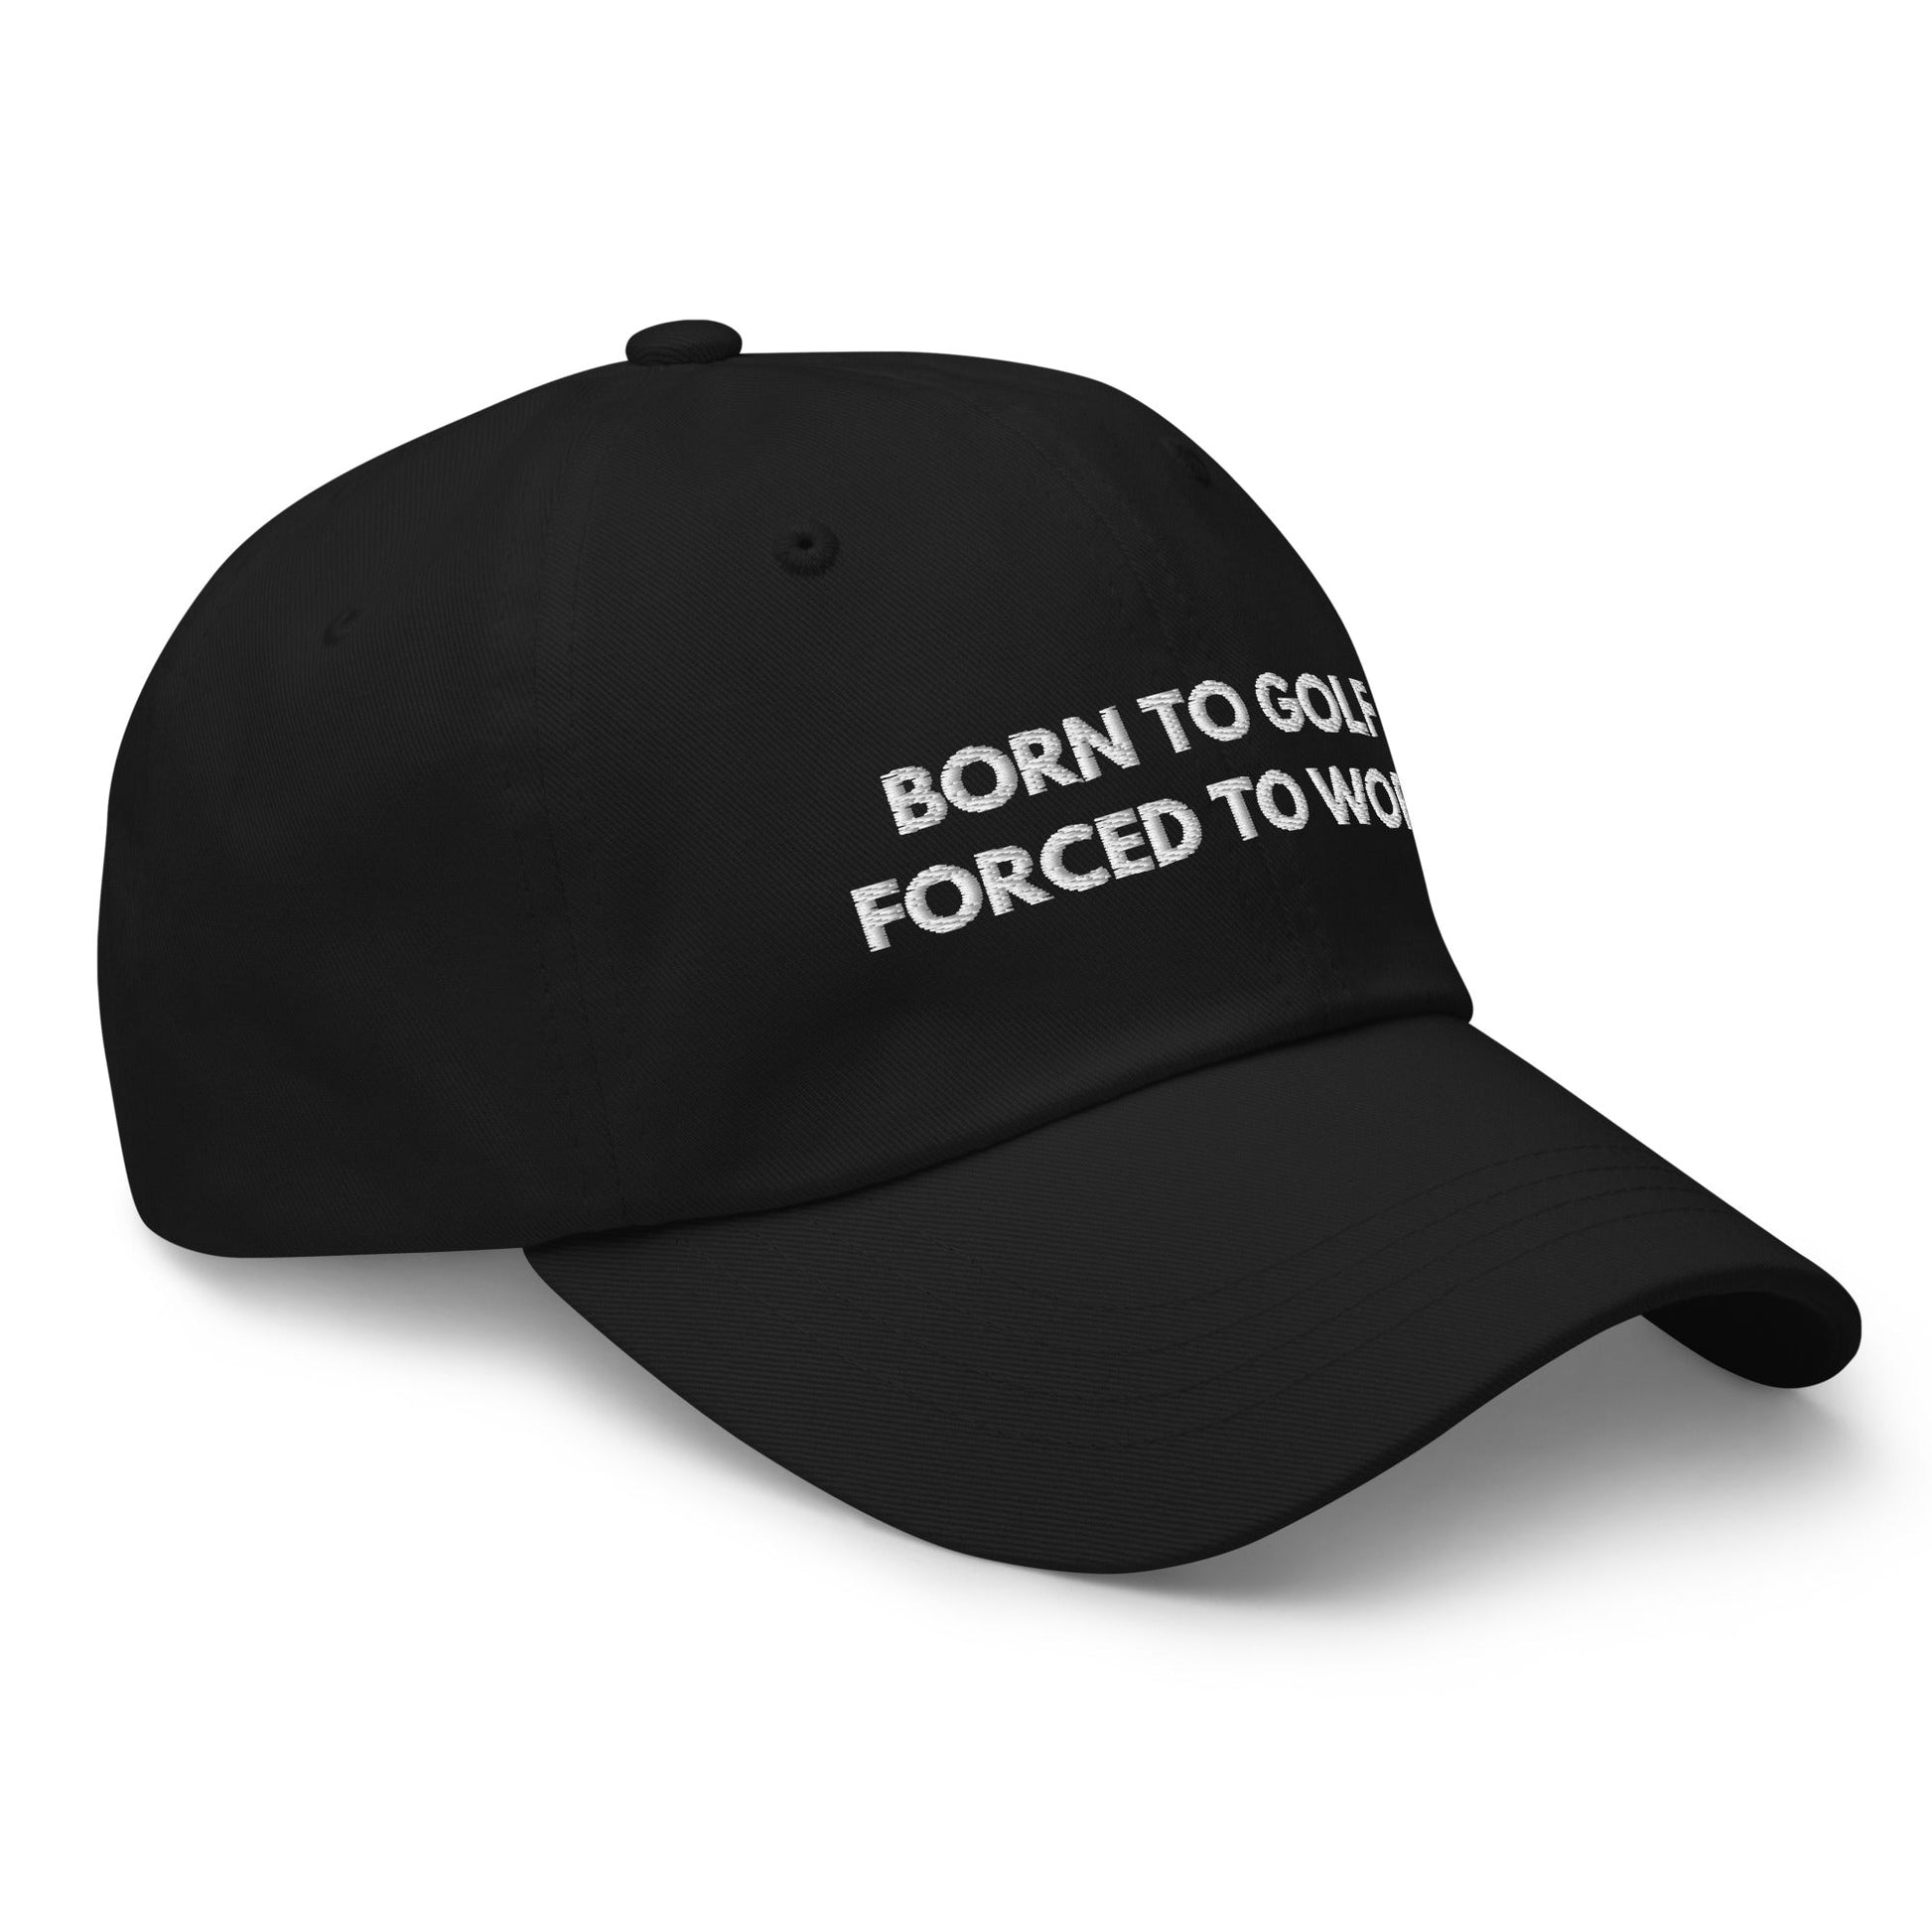 Funny Golfer Gifts  Dad Cap Born to Golf, Forced To Work Hat Cap